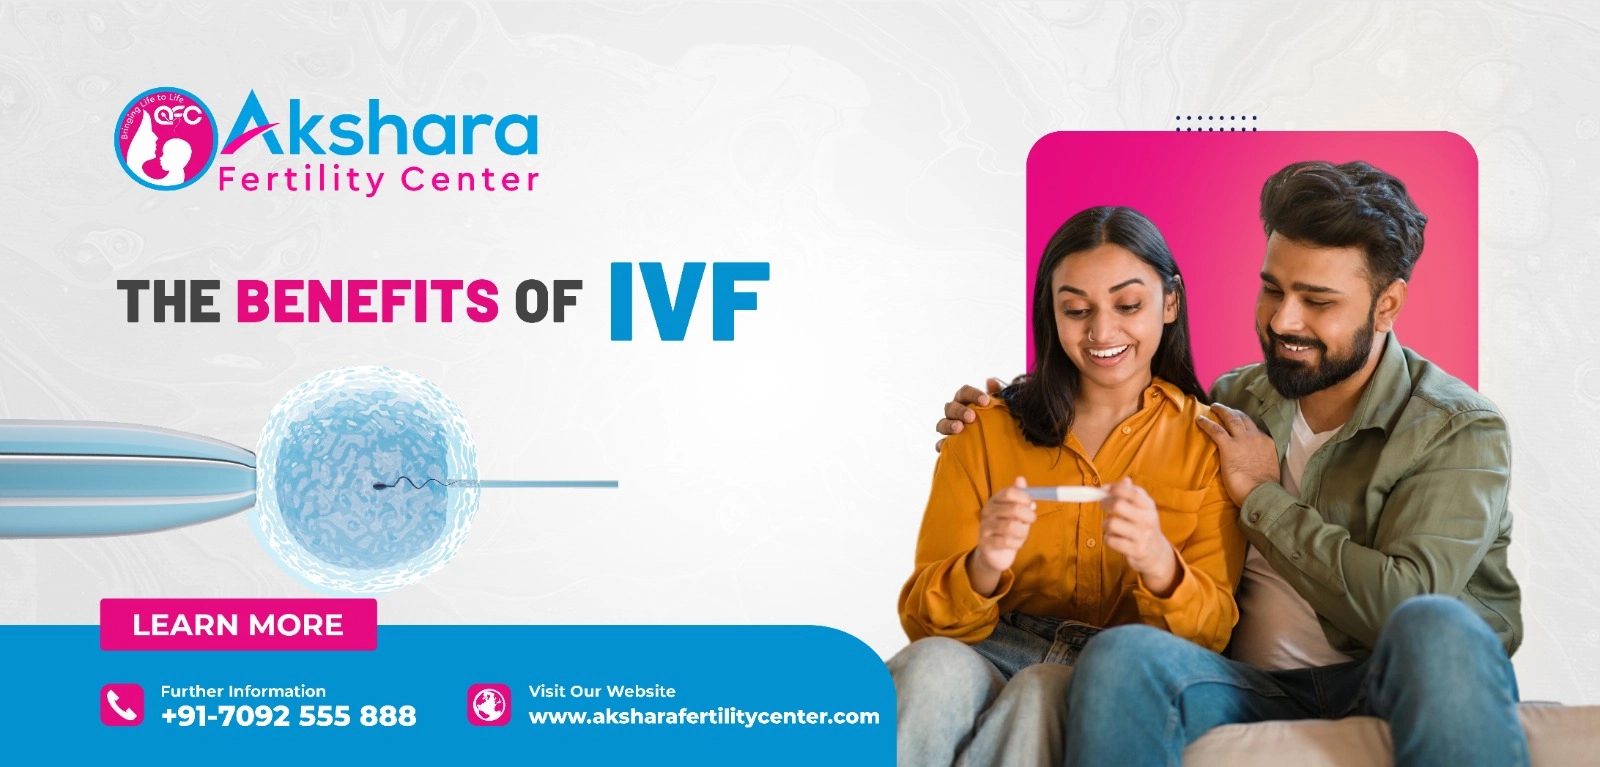 The Benefits of IVF for Infertile Couples